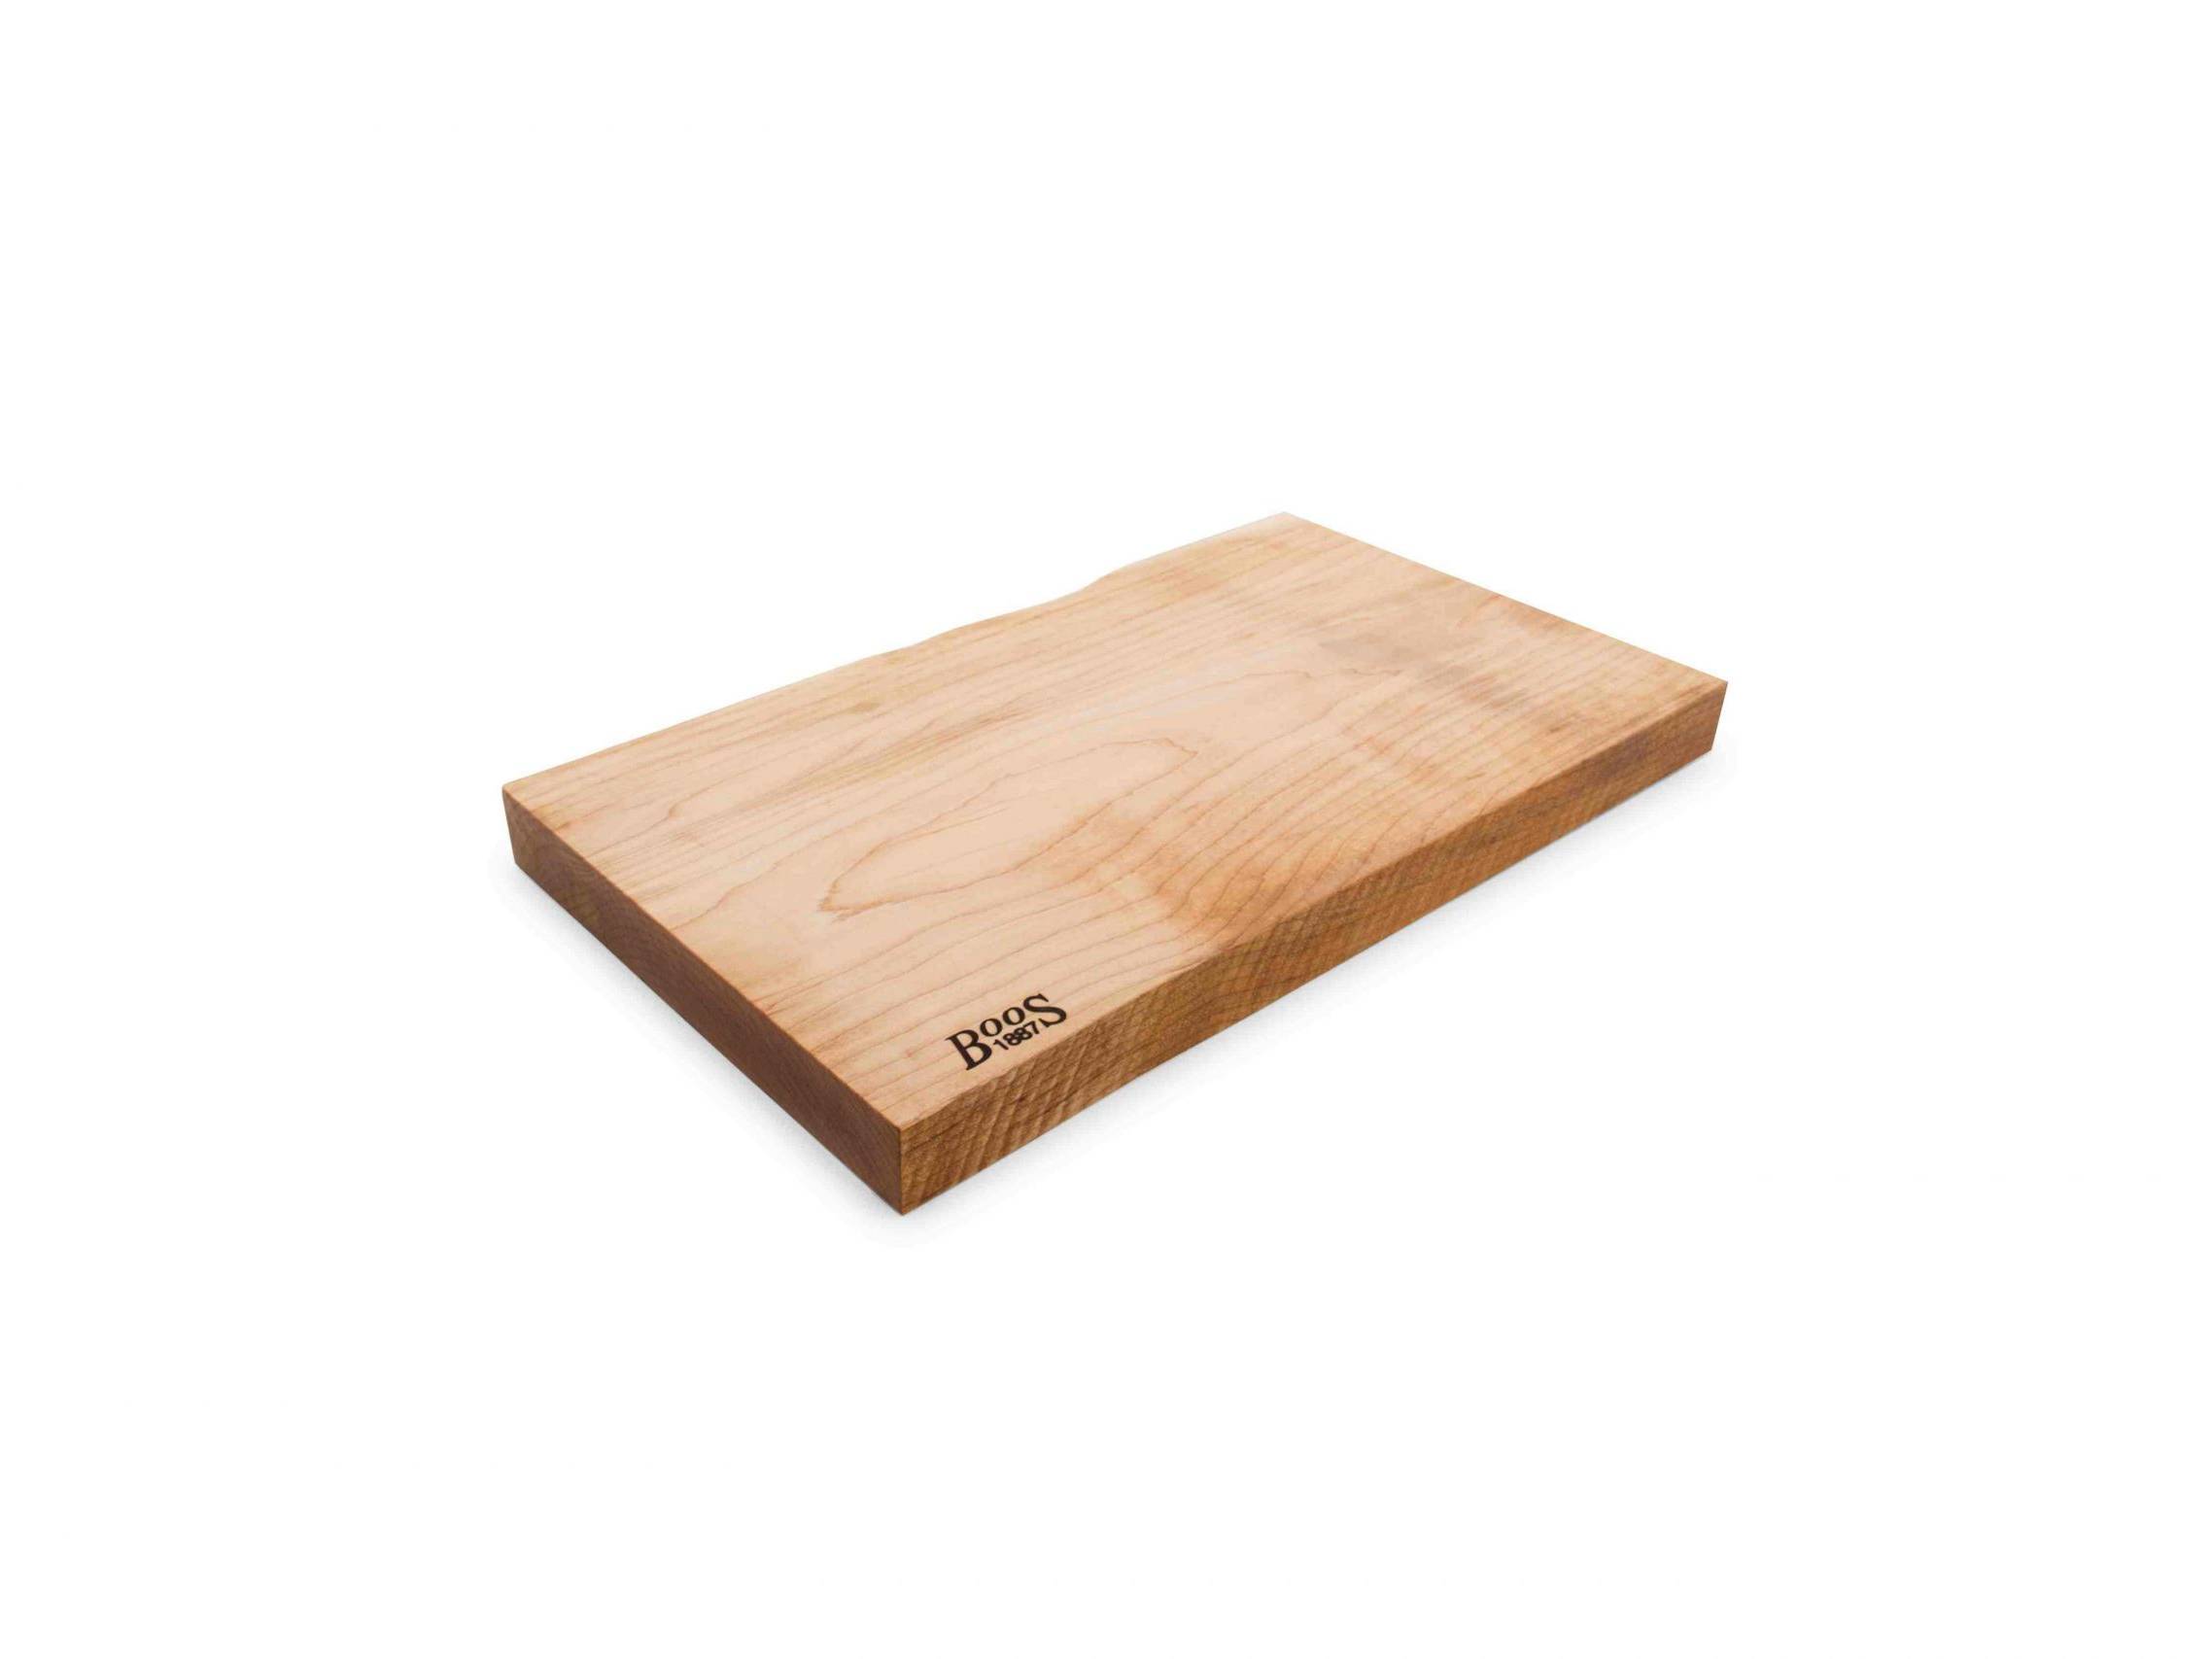 Boos 1887 / Rustic Edge one piece cutting board; hard maple; can be used on both sides 3